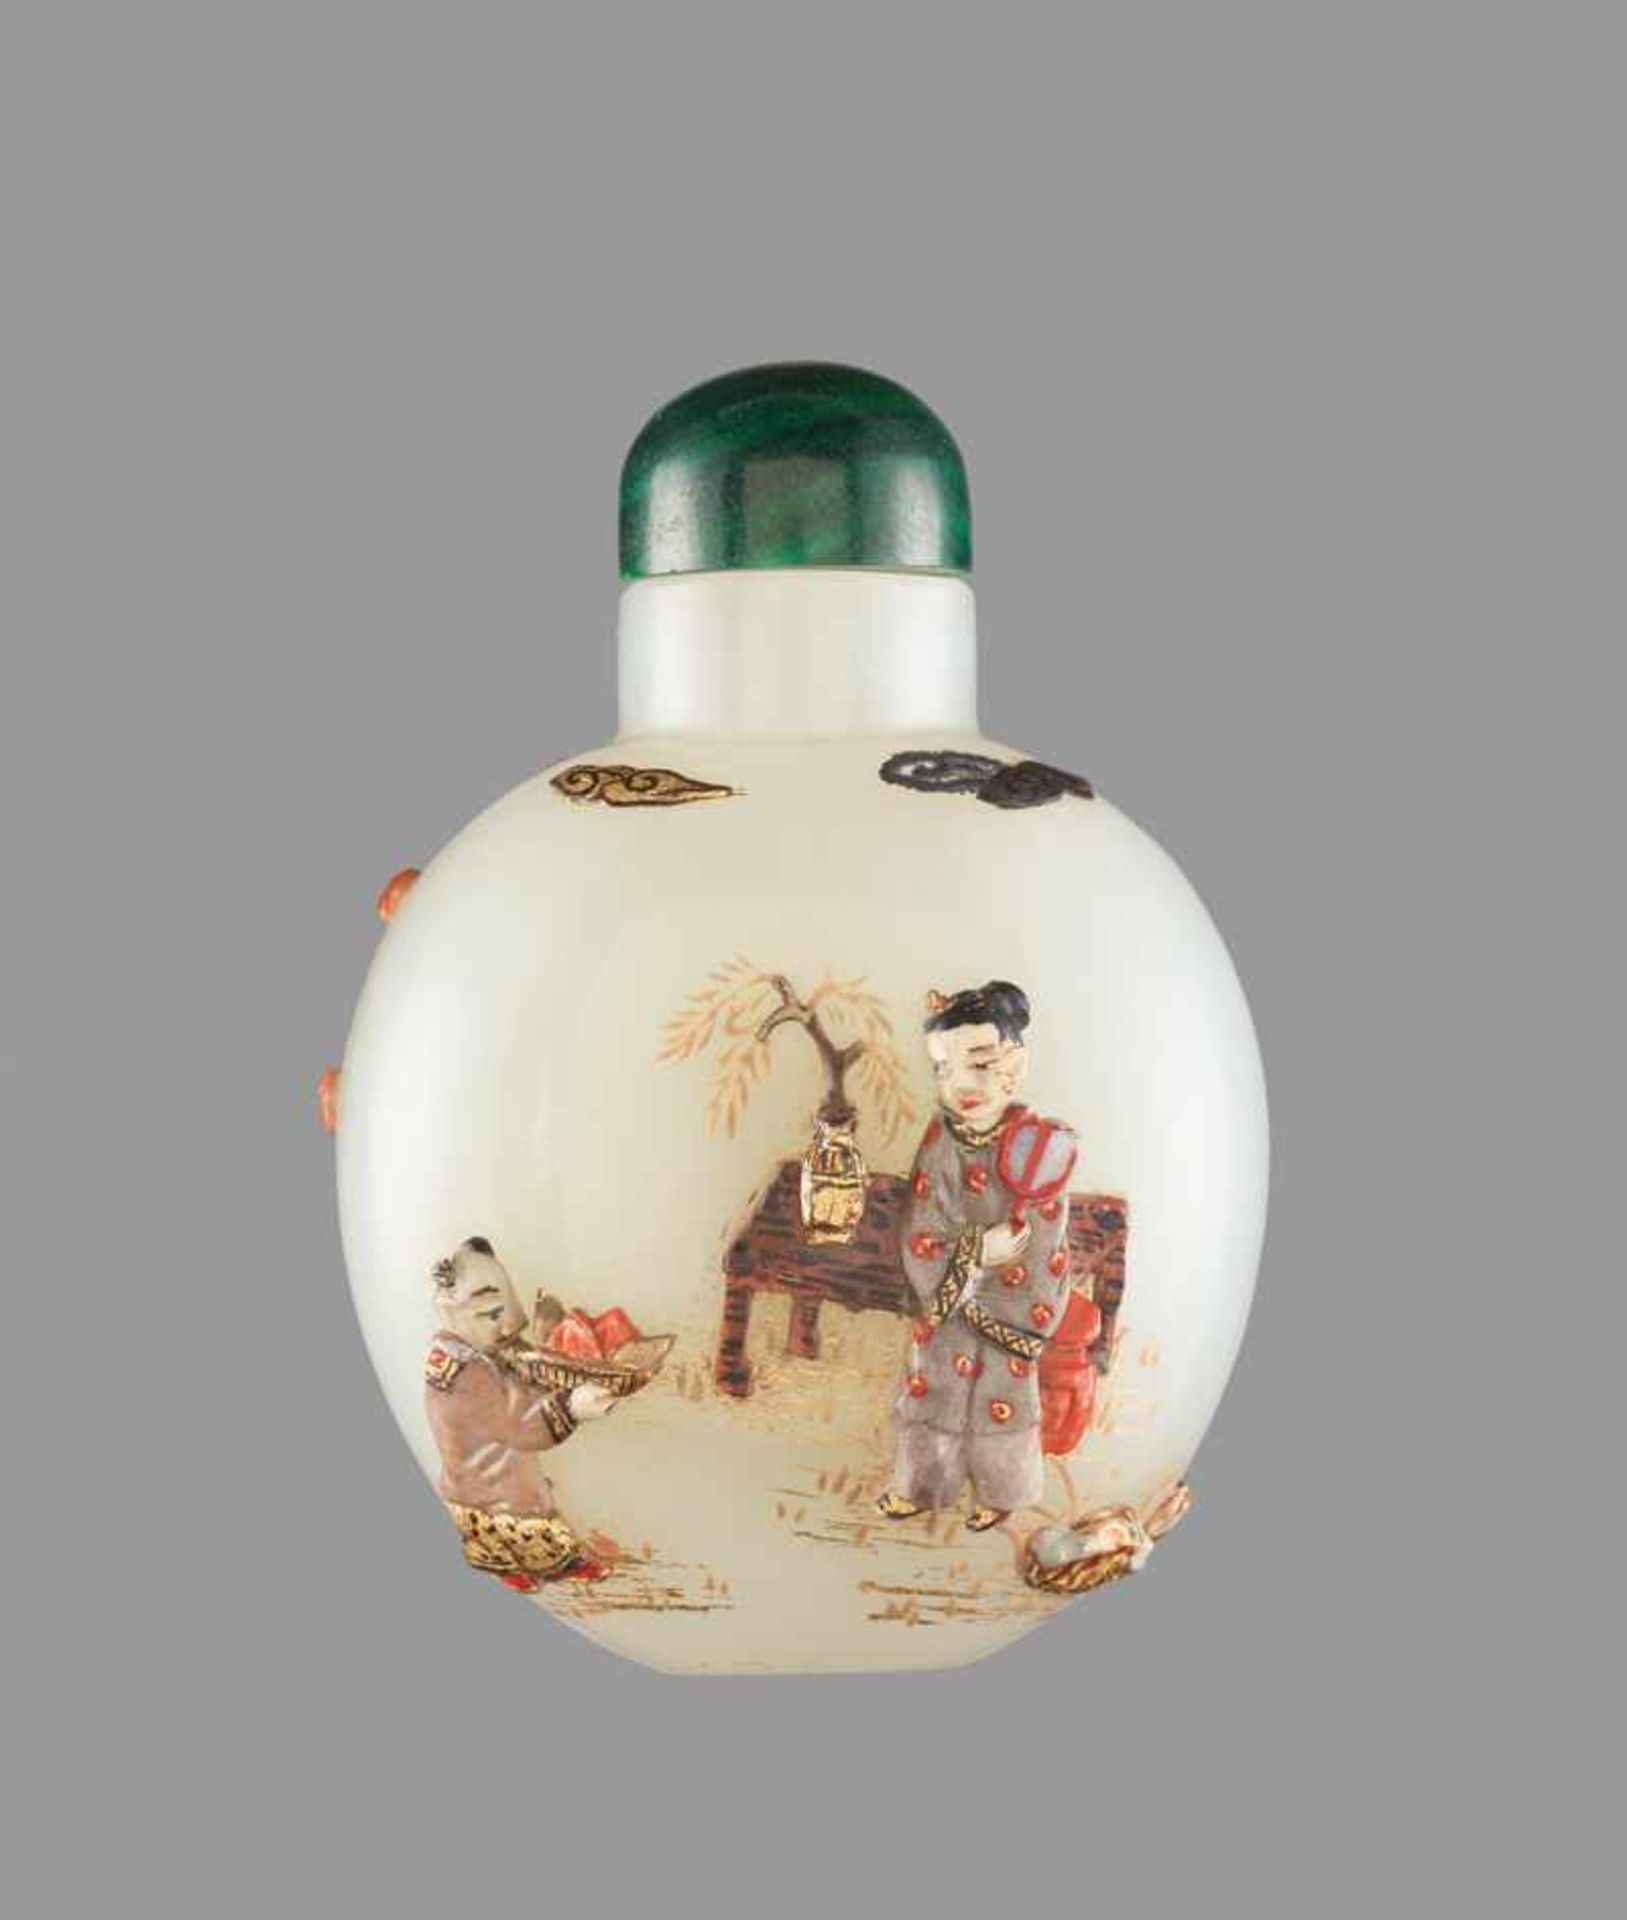 AN EMBELLISHED WHITE JADE ‘PEACH PICKING’ SNUFF BOTTLE, QING DYNASTY White nephrite jade of even